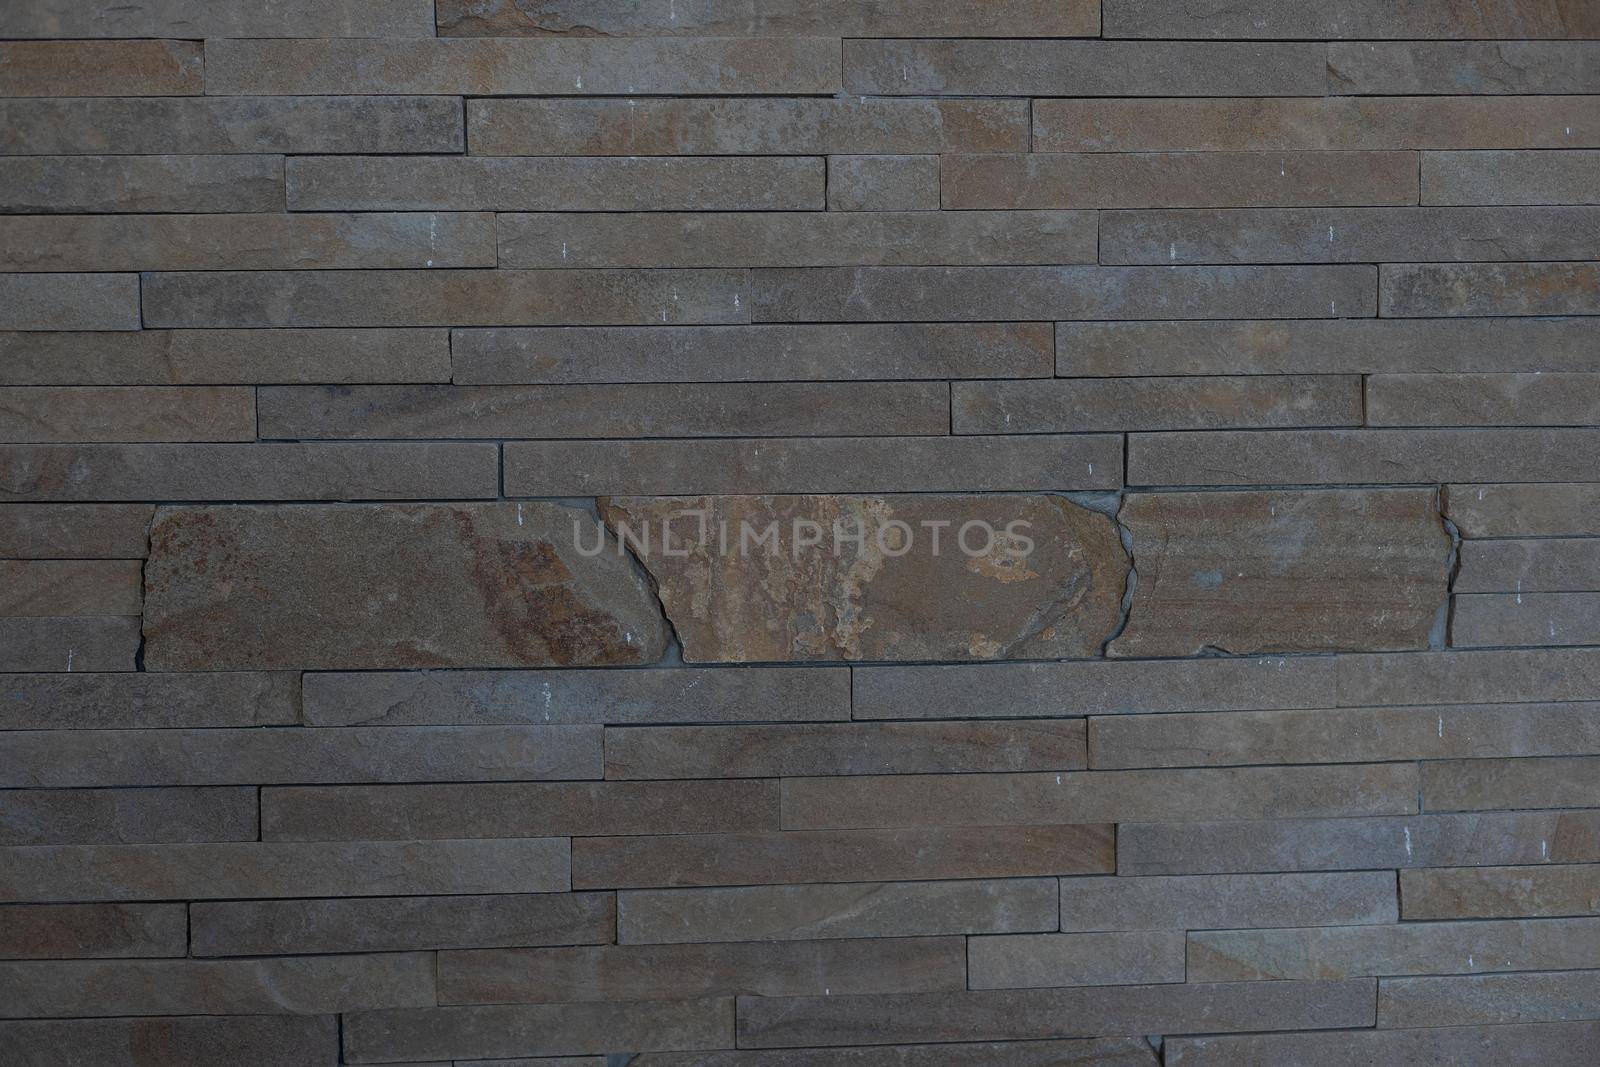 Elegant stone cladding wall made of gray granite with different shades by Andelov13